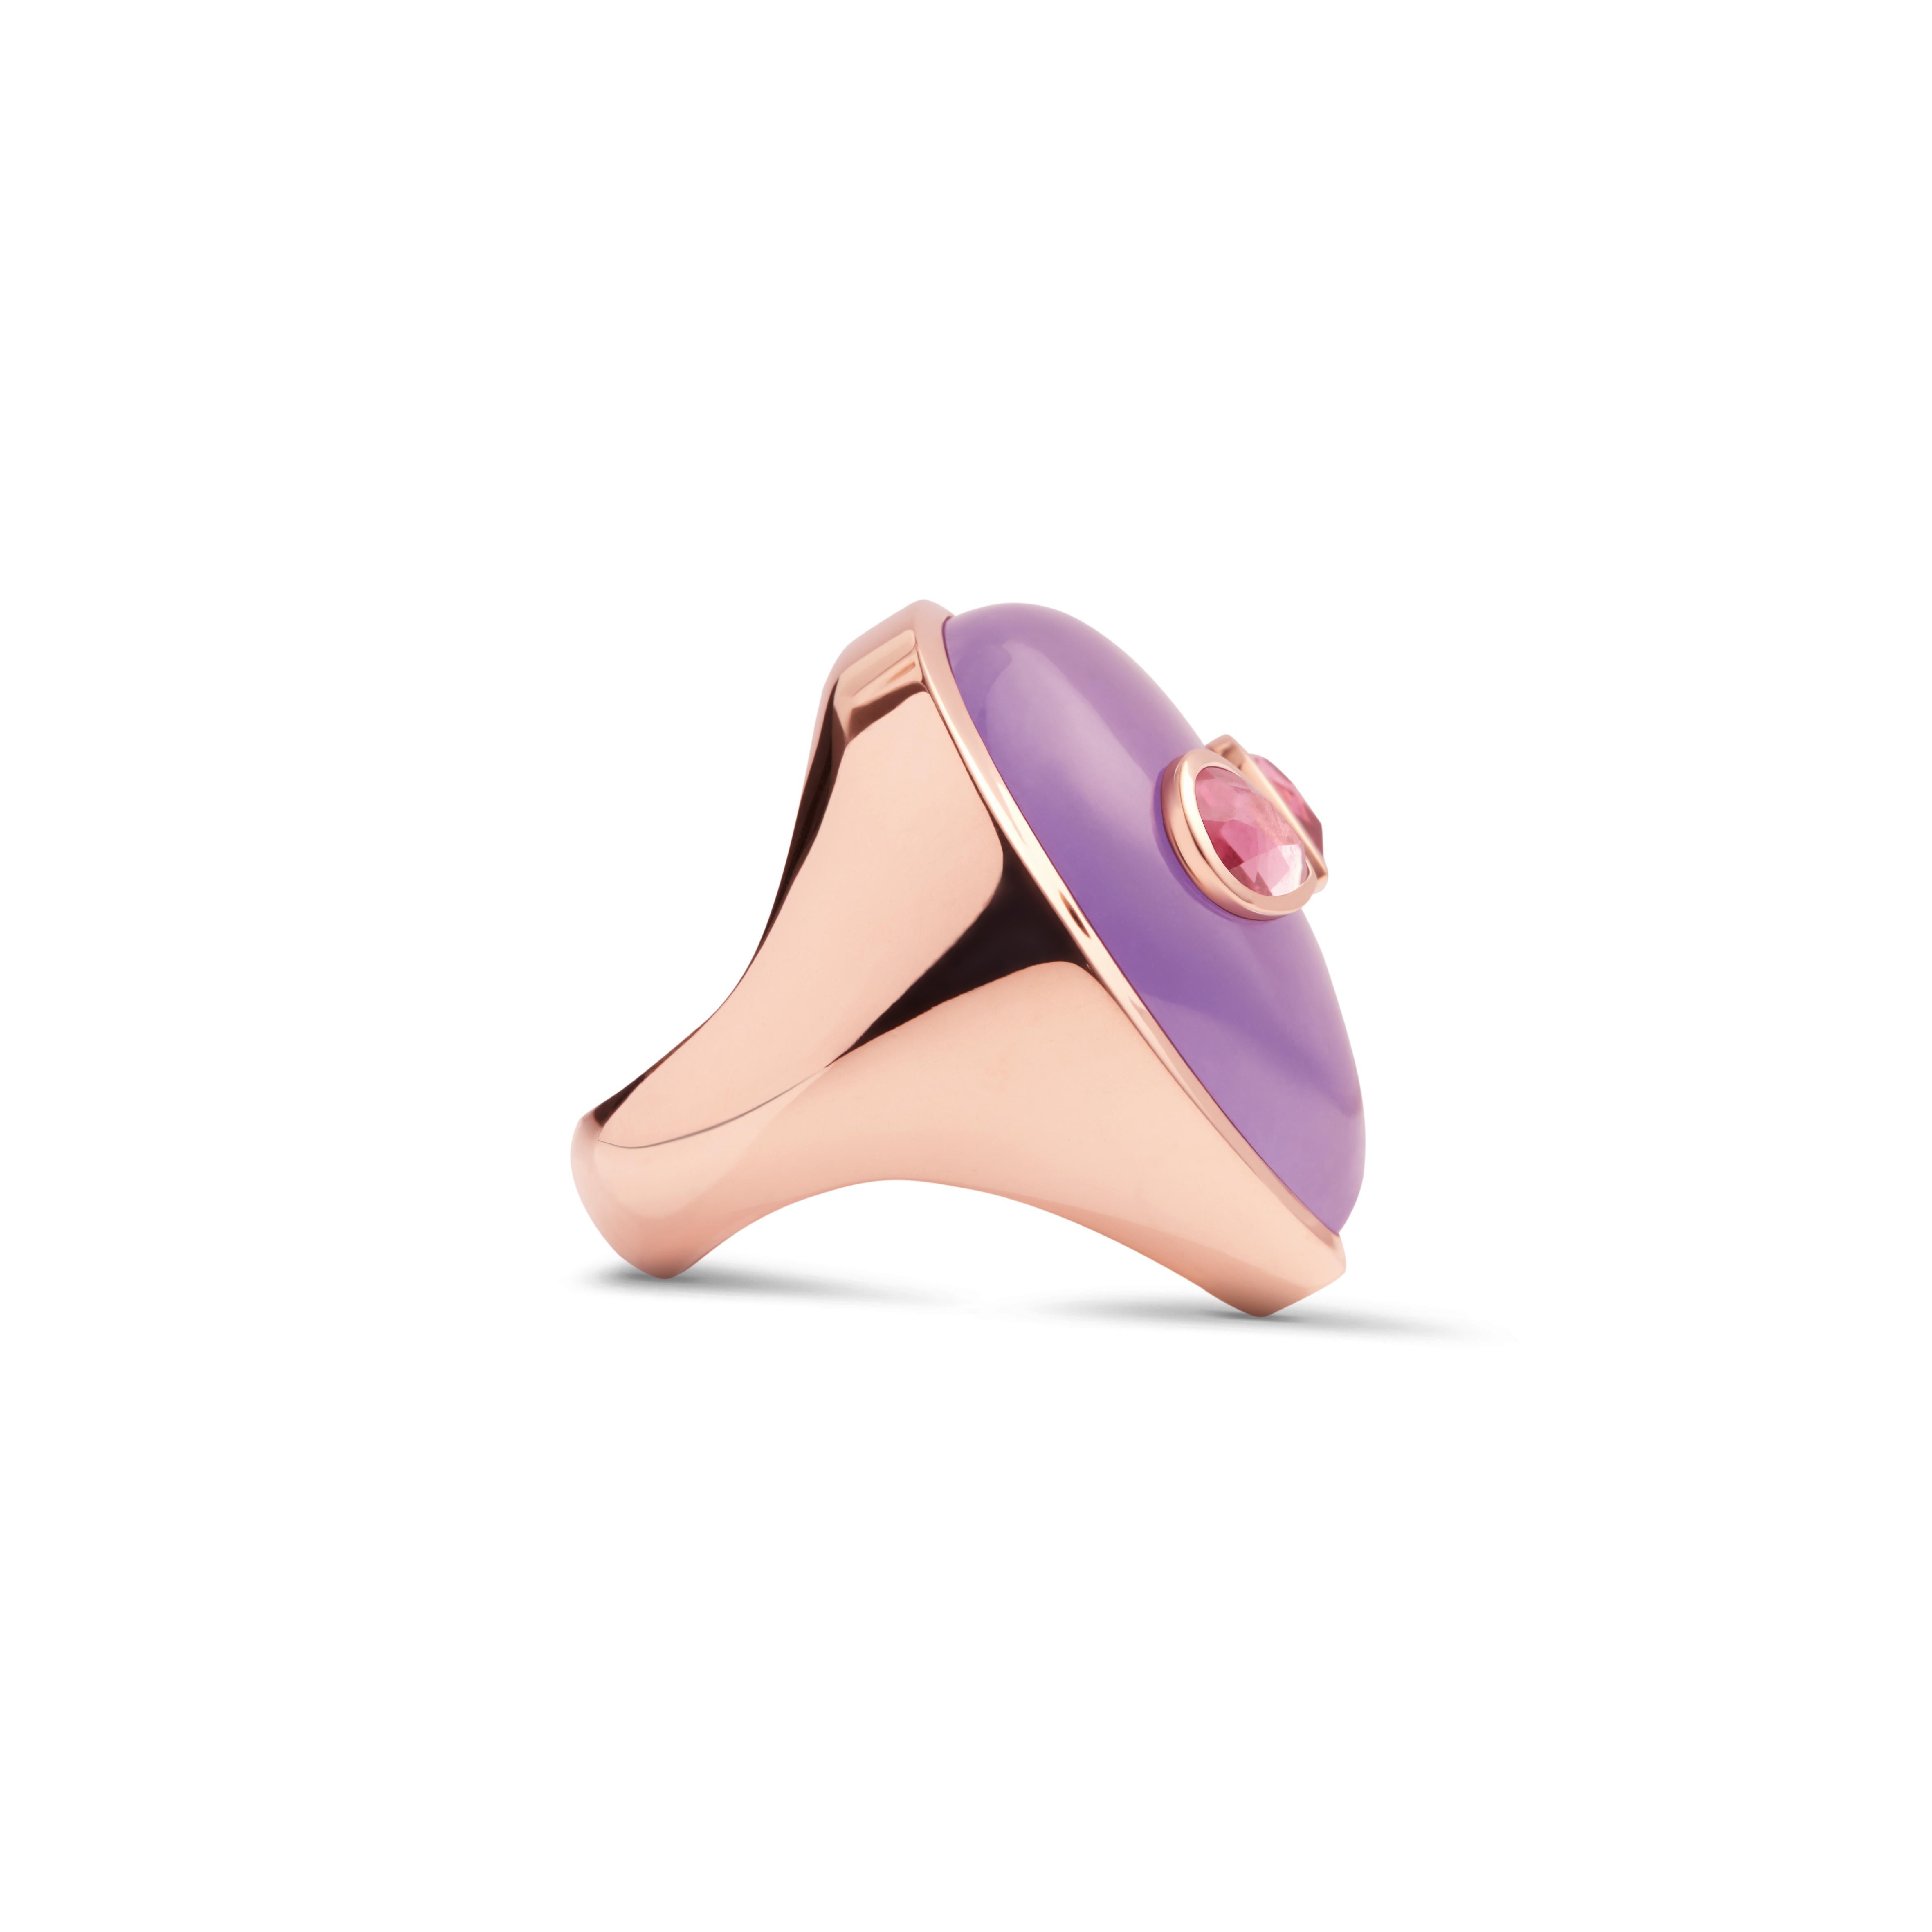 A 90’s obsession with aliens and a minimalist aesthetic are the inspiration behind this one of a kind ring. Bright colored stones imitate the fluorescent colors popular in the 90’s and bring life to this extraterrestrial face made of lavender jade